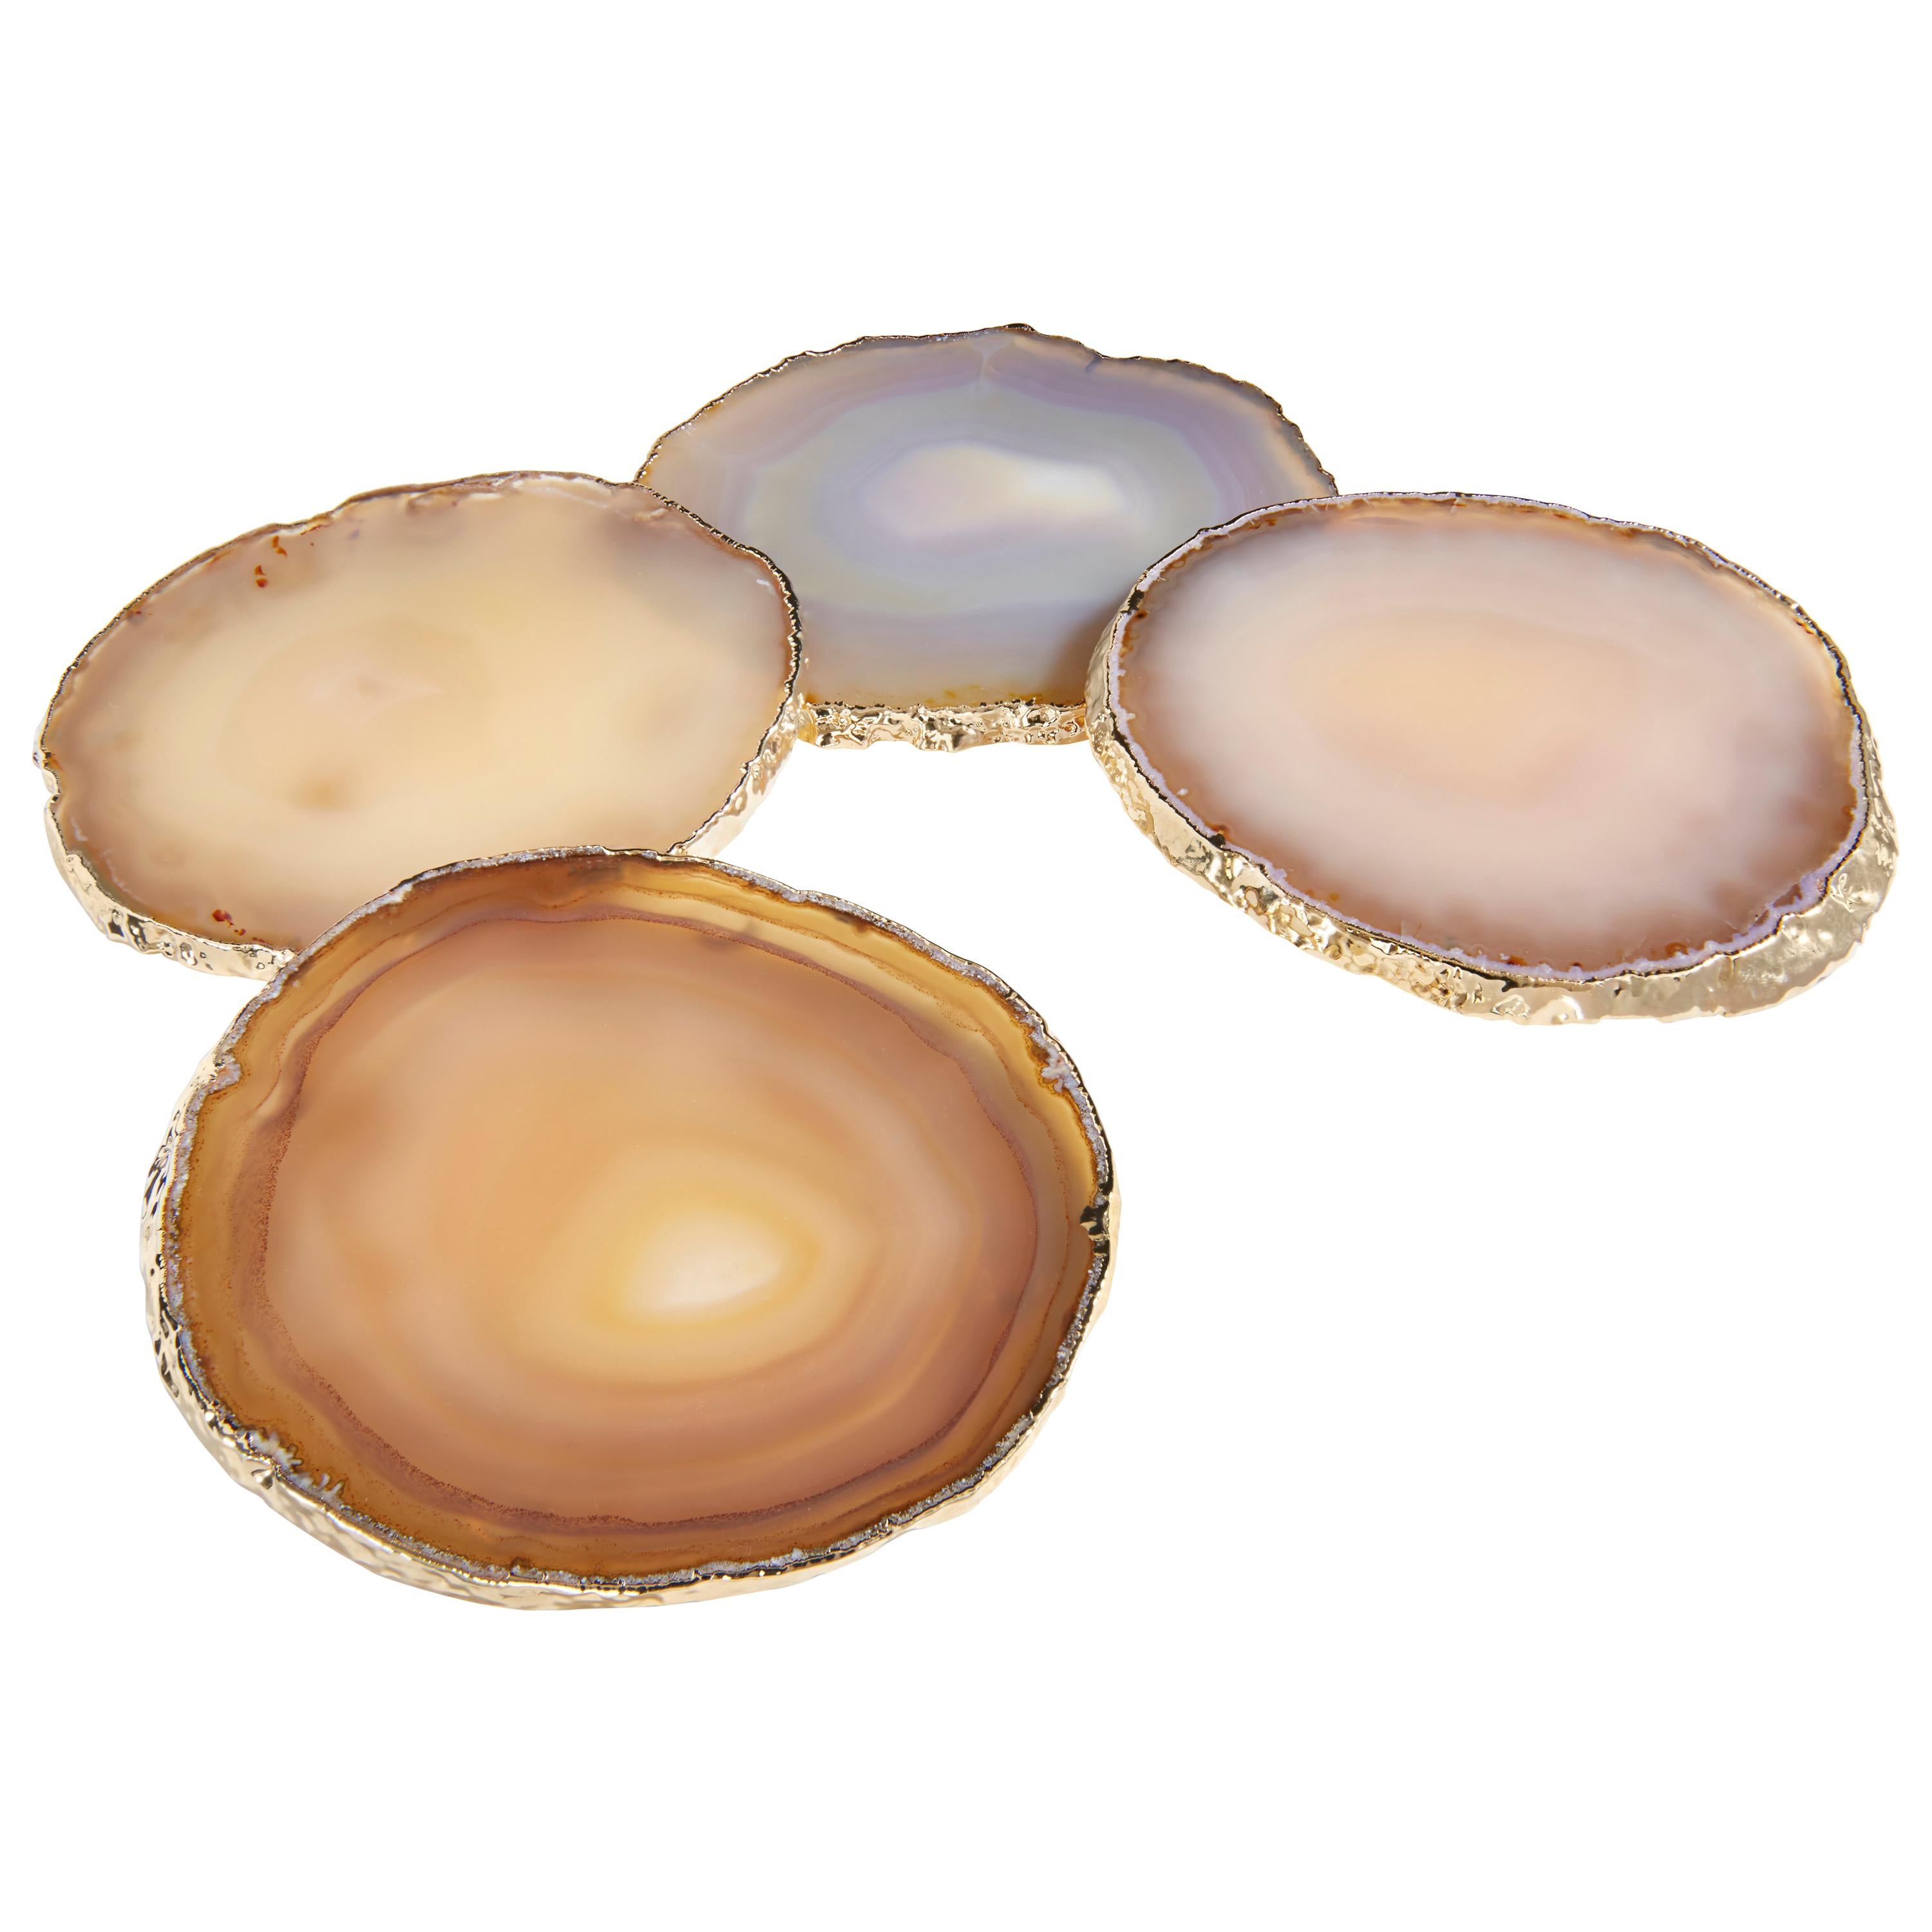 Lumino Coasters in Agate and 24-Karat Gold by ANNA New York For Sale